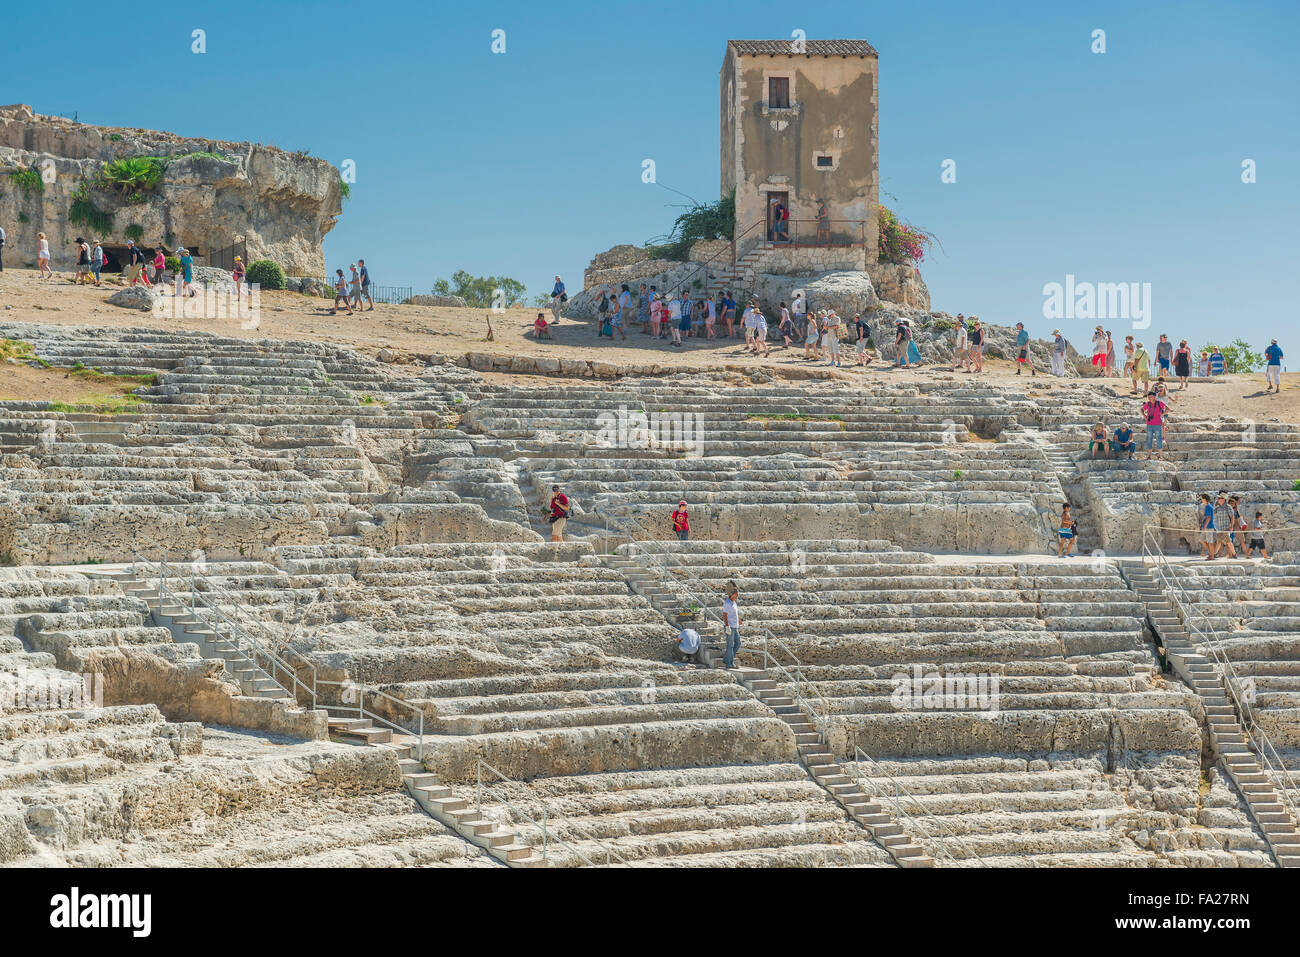 Sicily Greek theatre, view of tourists visiting the auditorium of the ancient Greek theater in the Archaeological Park at Syracuse (Siracusa), Sicily Stock Photo